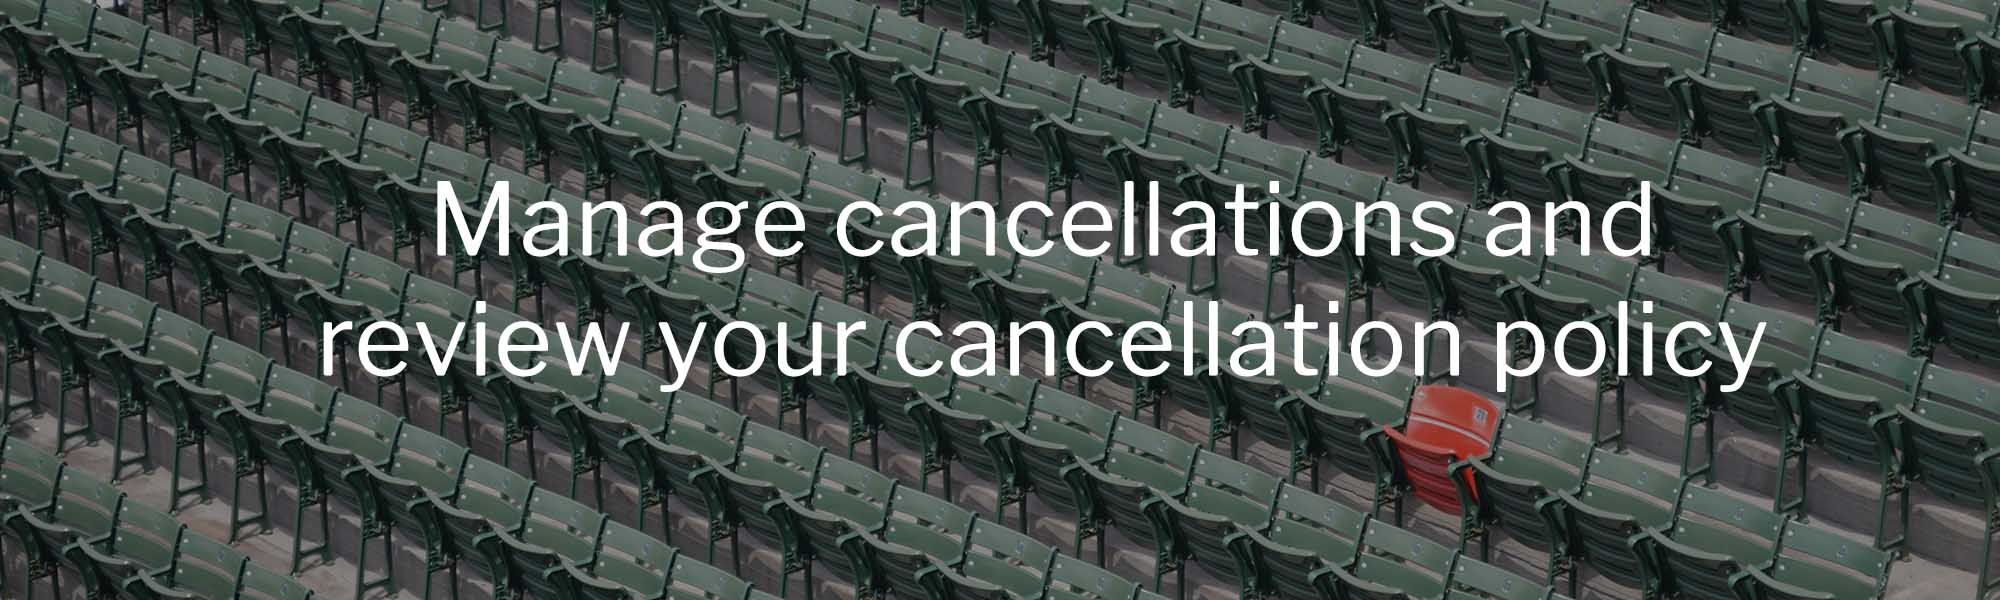 how to manage cancellations